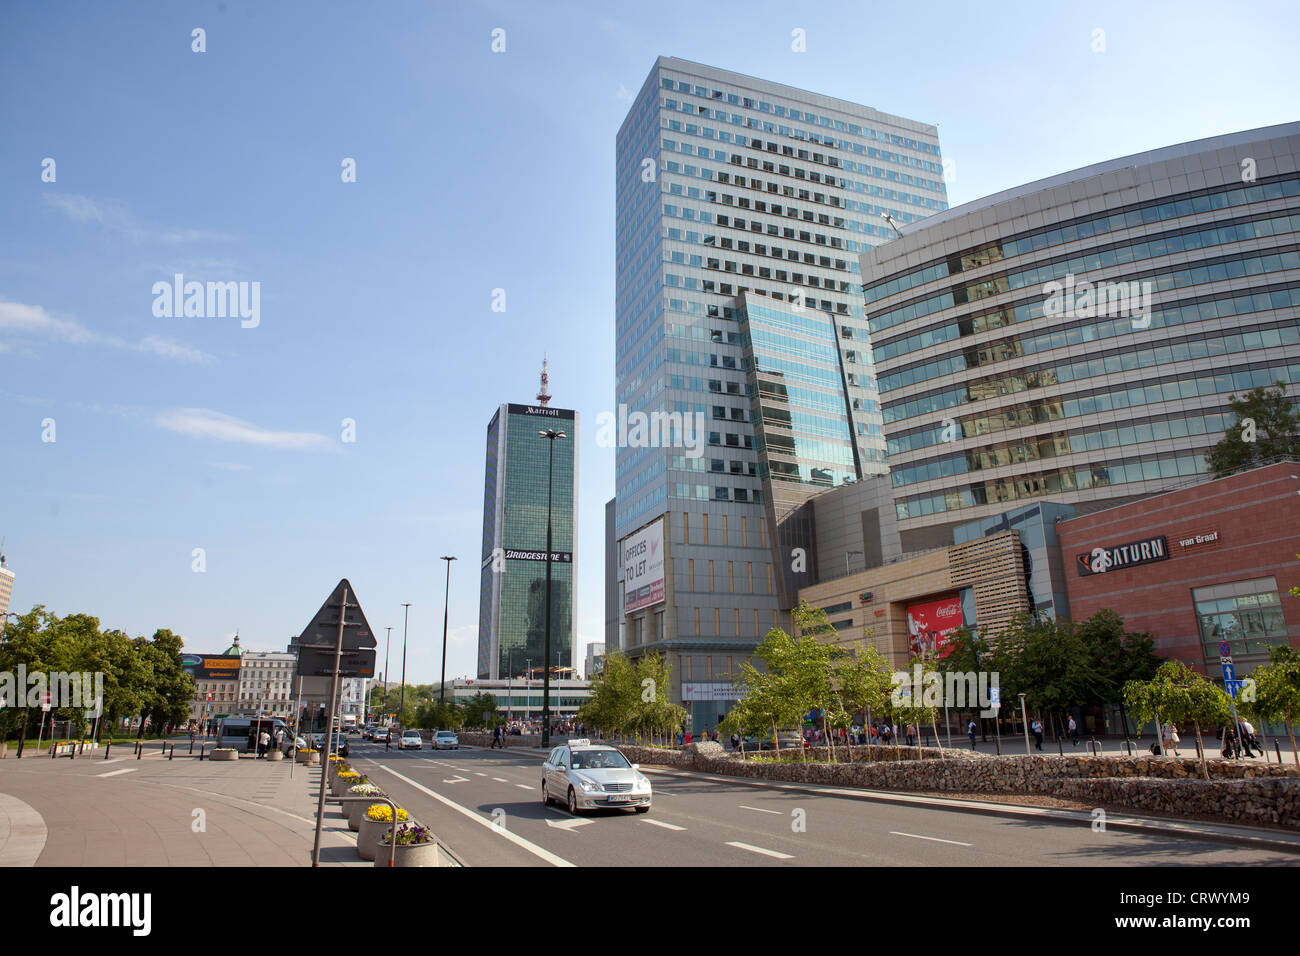 The city centre & central business district, Warsaw, Poland, Stock Photo